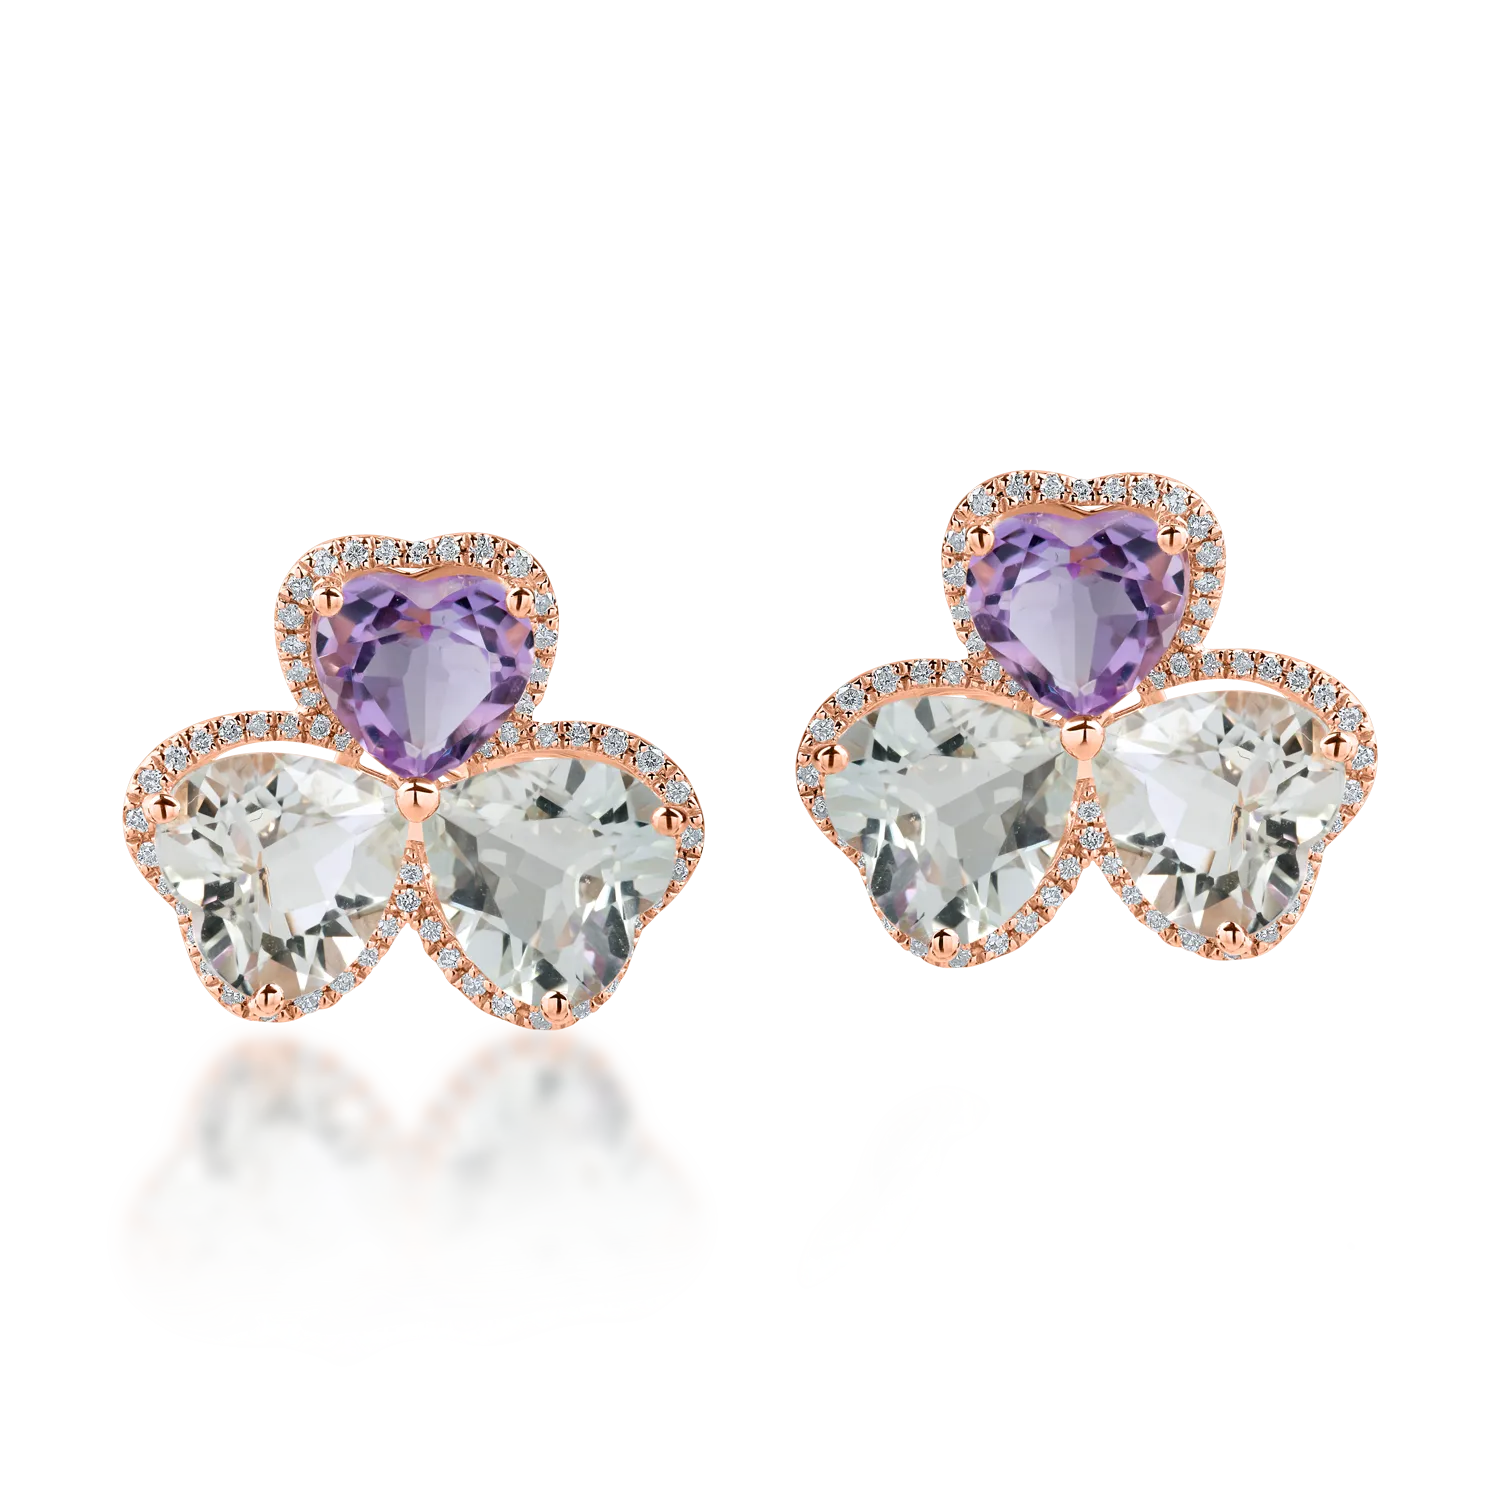 Rose gold earrings with 8.5ct amethysts and 0.3ct diamonds